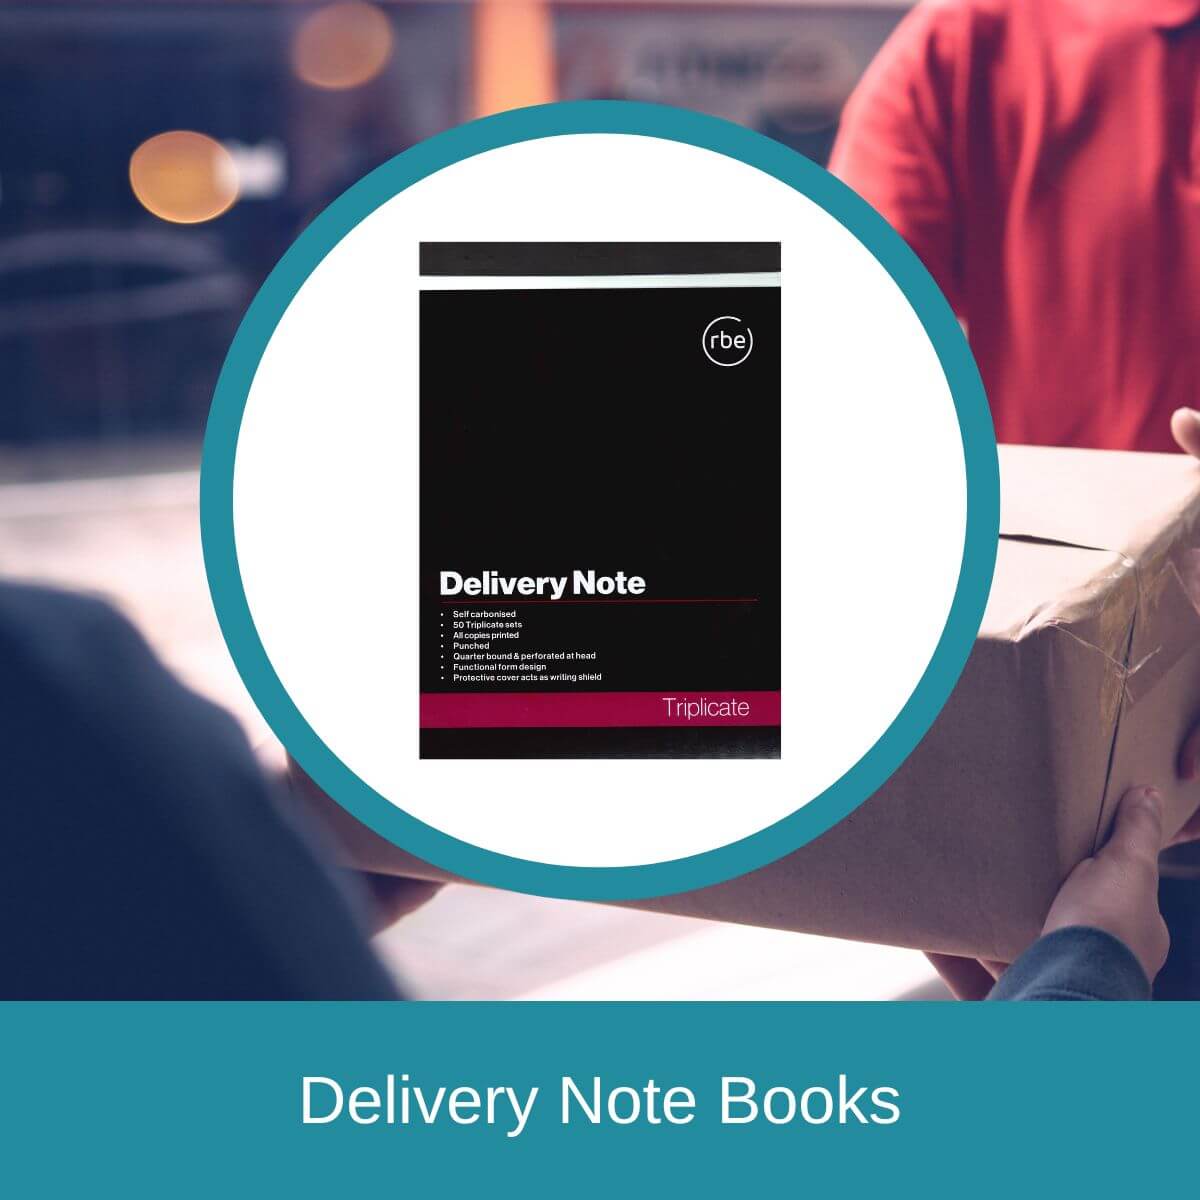 Delivery Note Books Product Options